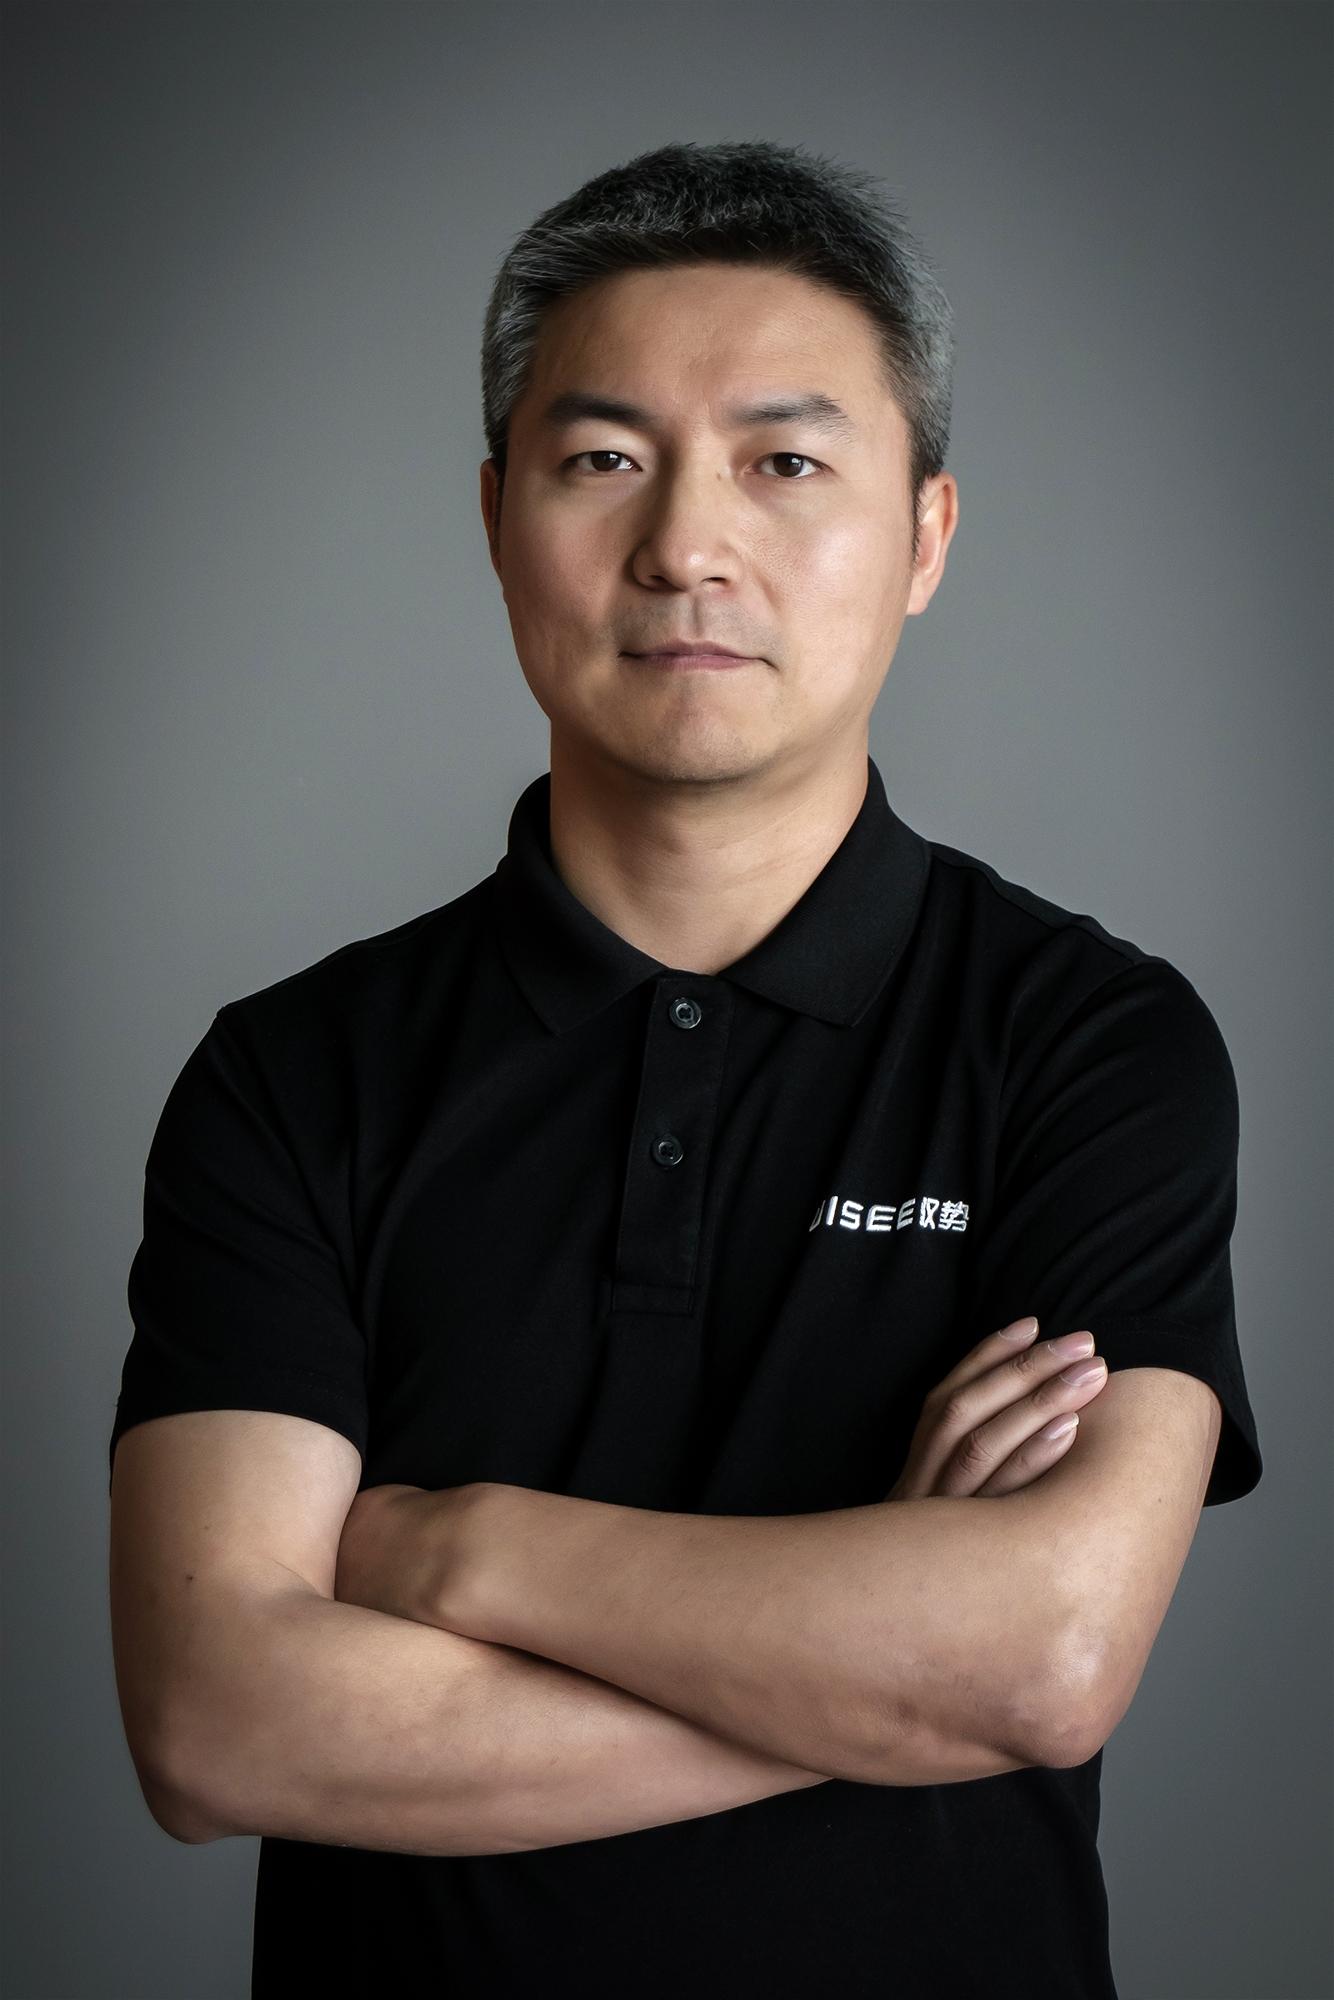 AI driverless technology company UISEE announced it will set up its international headquarters, a research and development centre and a corporate treasury centre in Hong Kong. Photo shows the Co-Founder, Chairman and CEO of UISEE, Mr Gansha Wu, who was a former president of Intel Labs China and an Intel Principal Engineer.